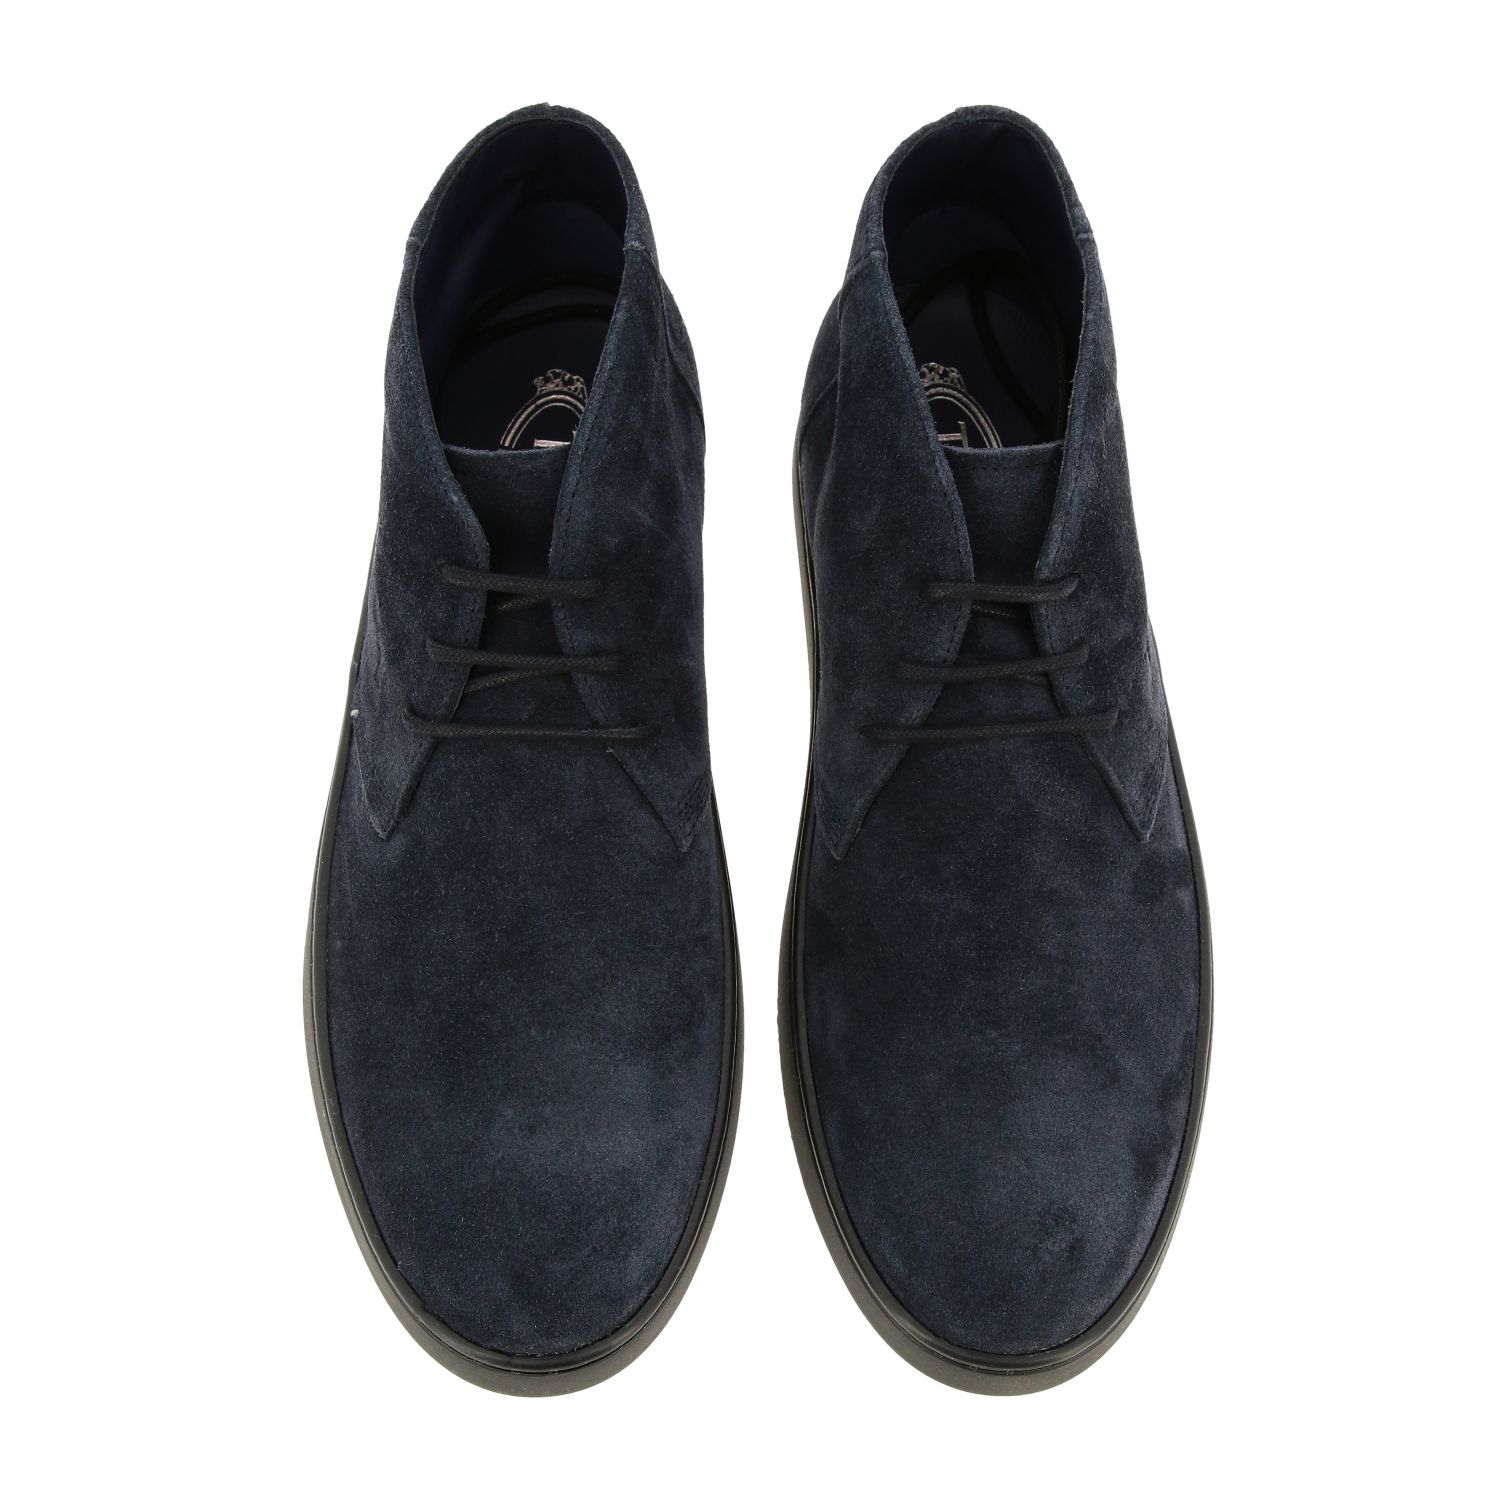 TOD'S: Shoes men - Blue | Chukka Boots Tod's XXM52B0AW50 RE0 GIGLIO.COM